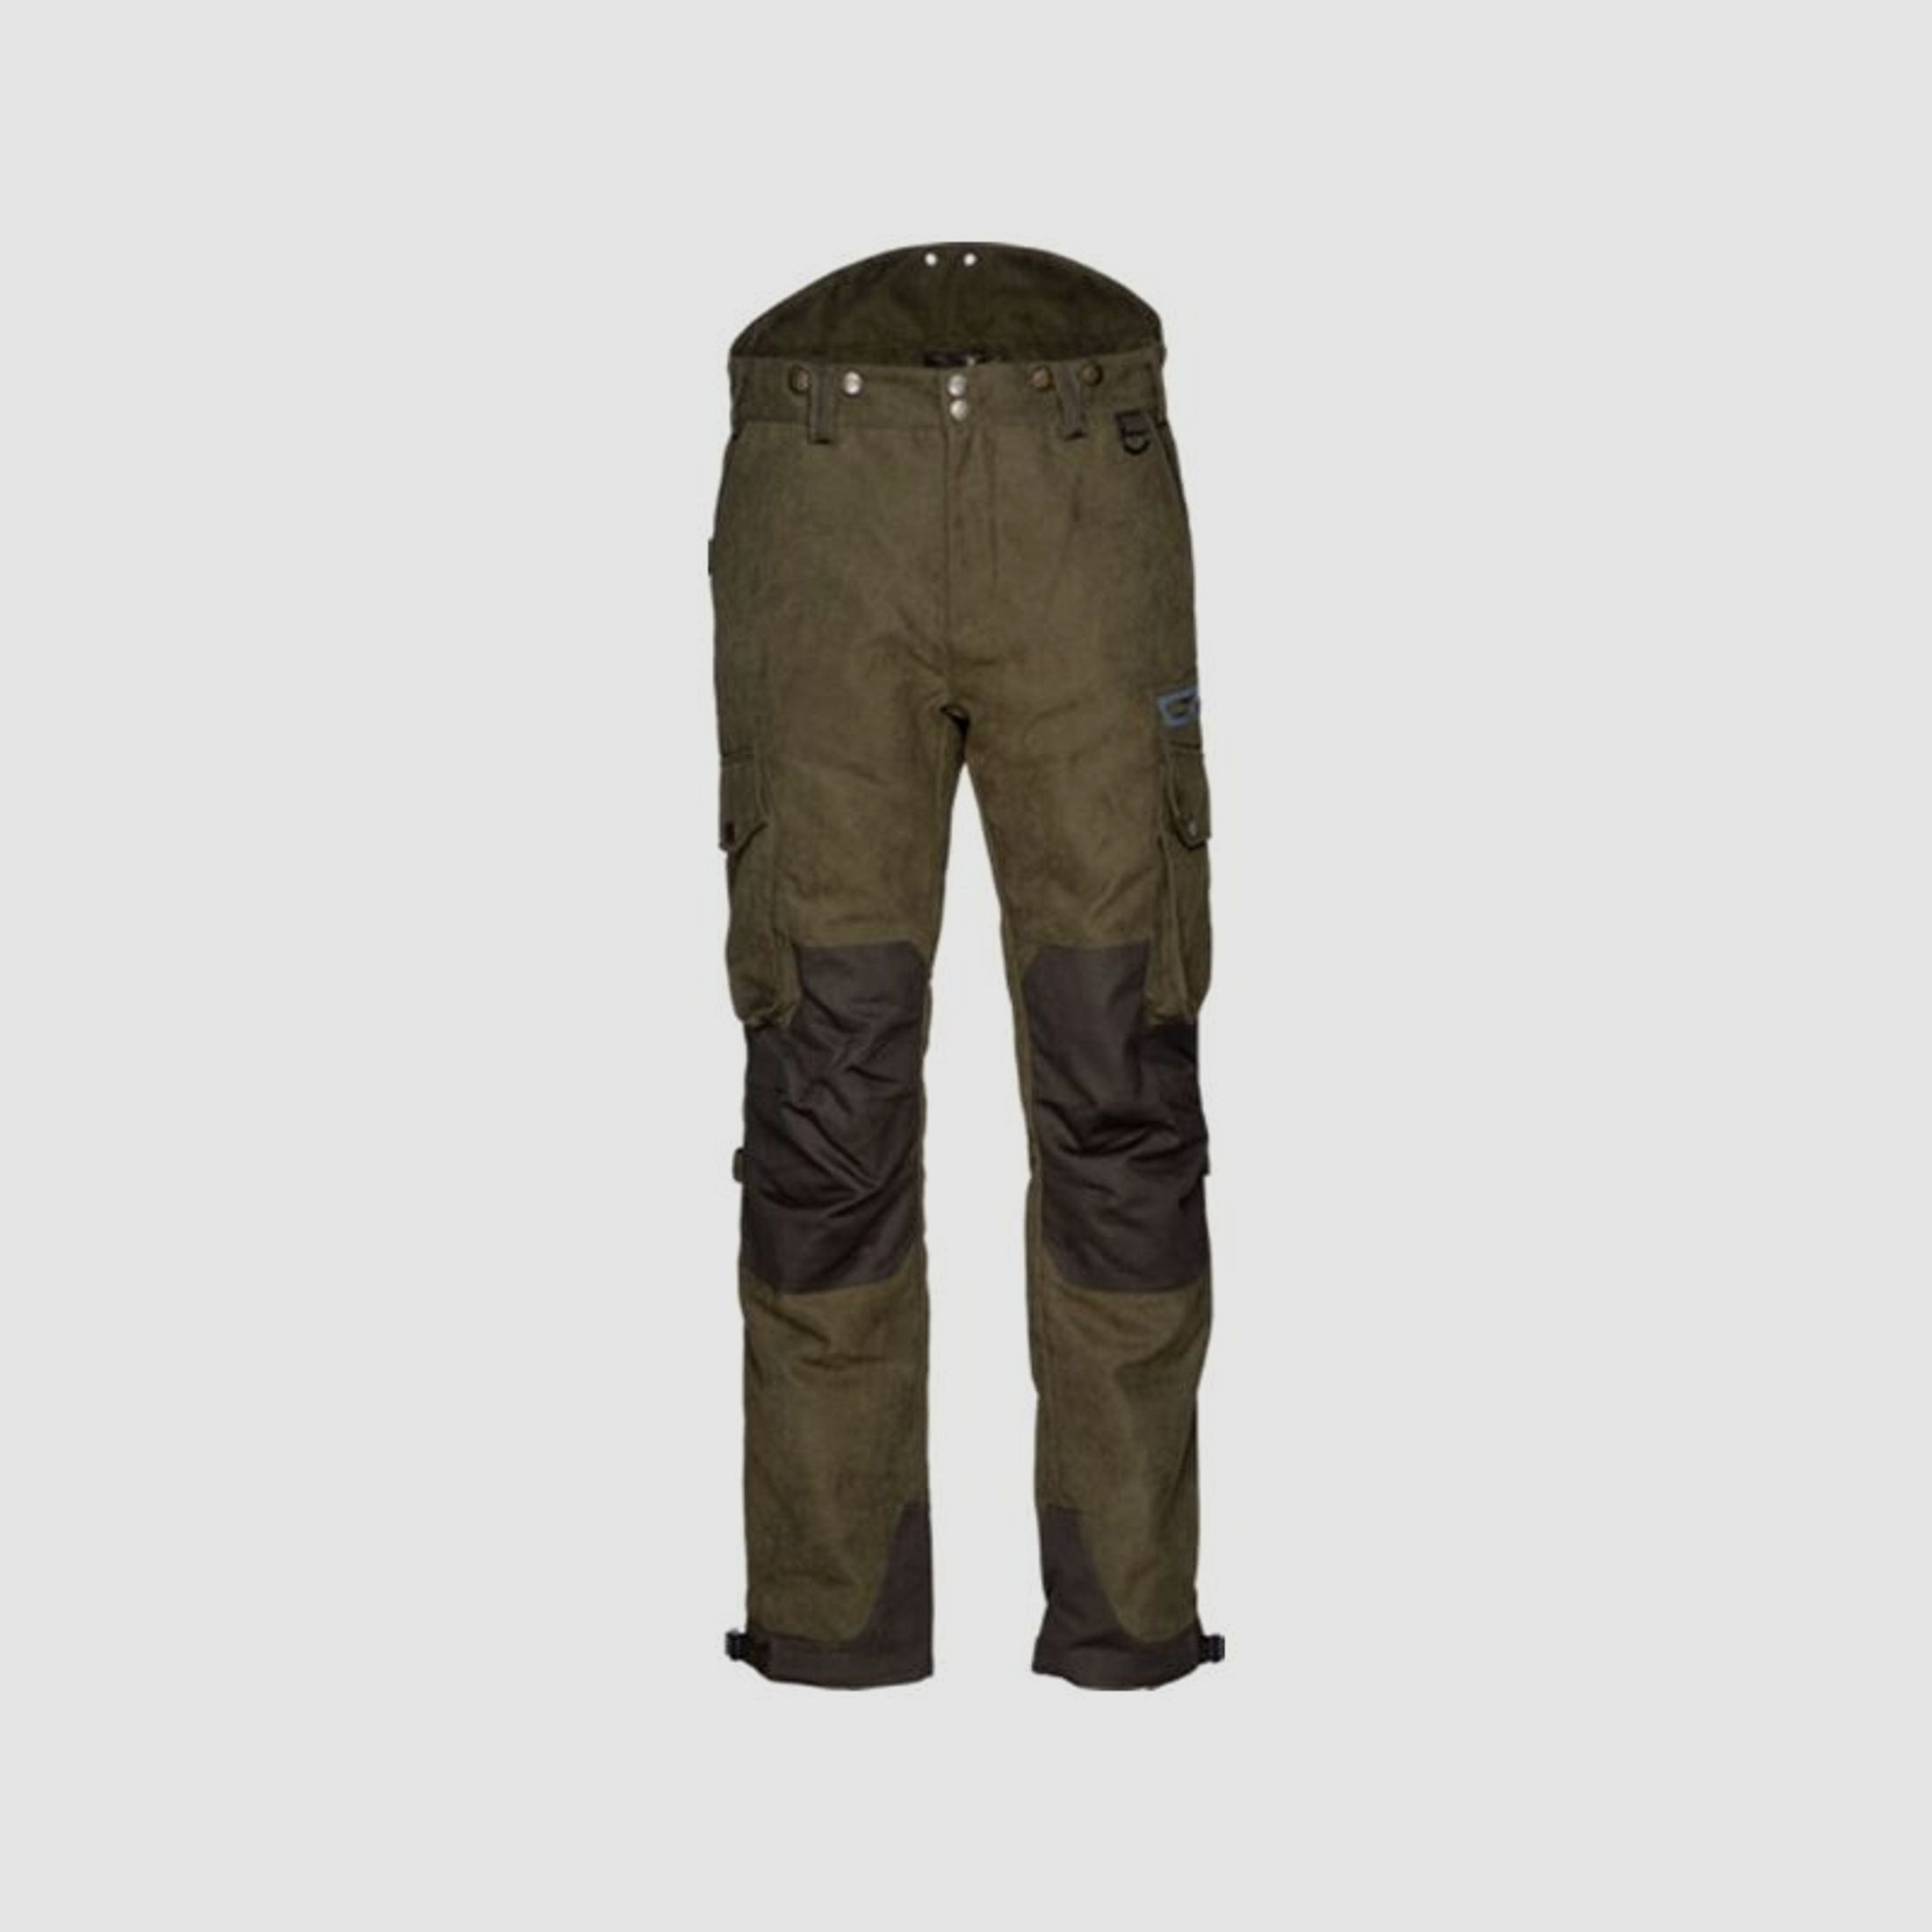 Seeland Helt Hose Grizzly brown